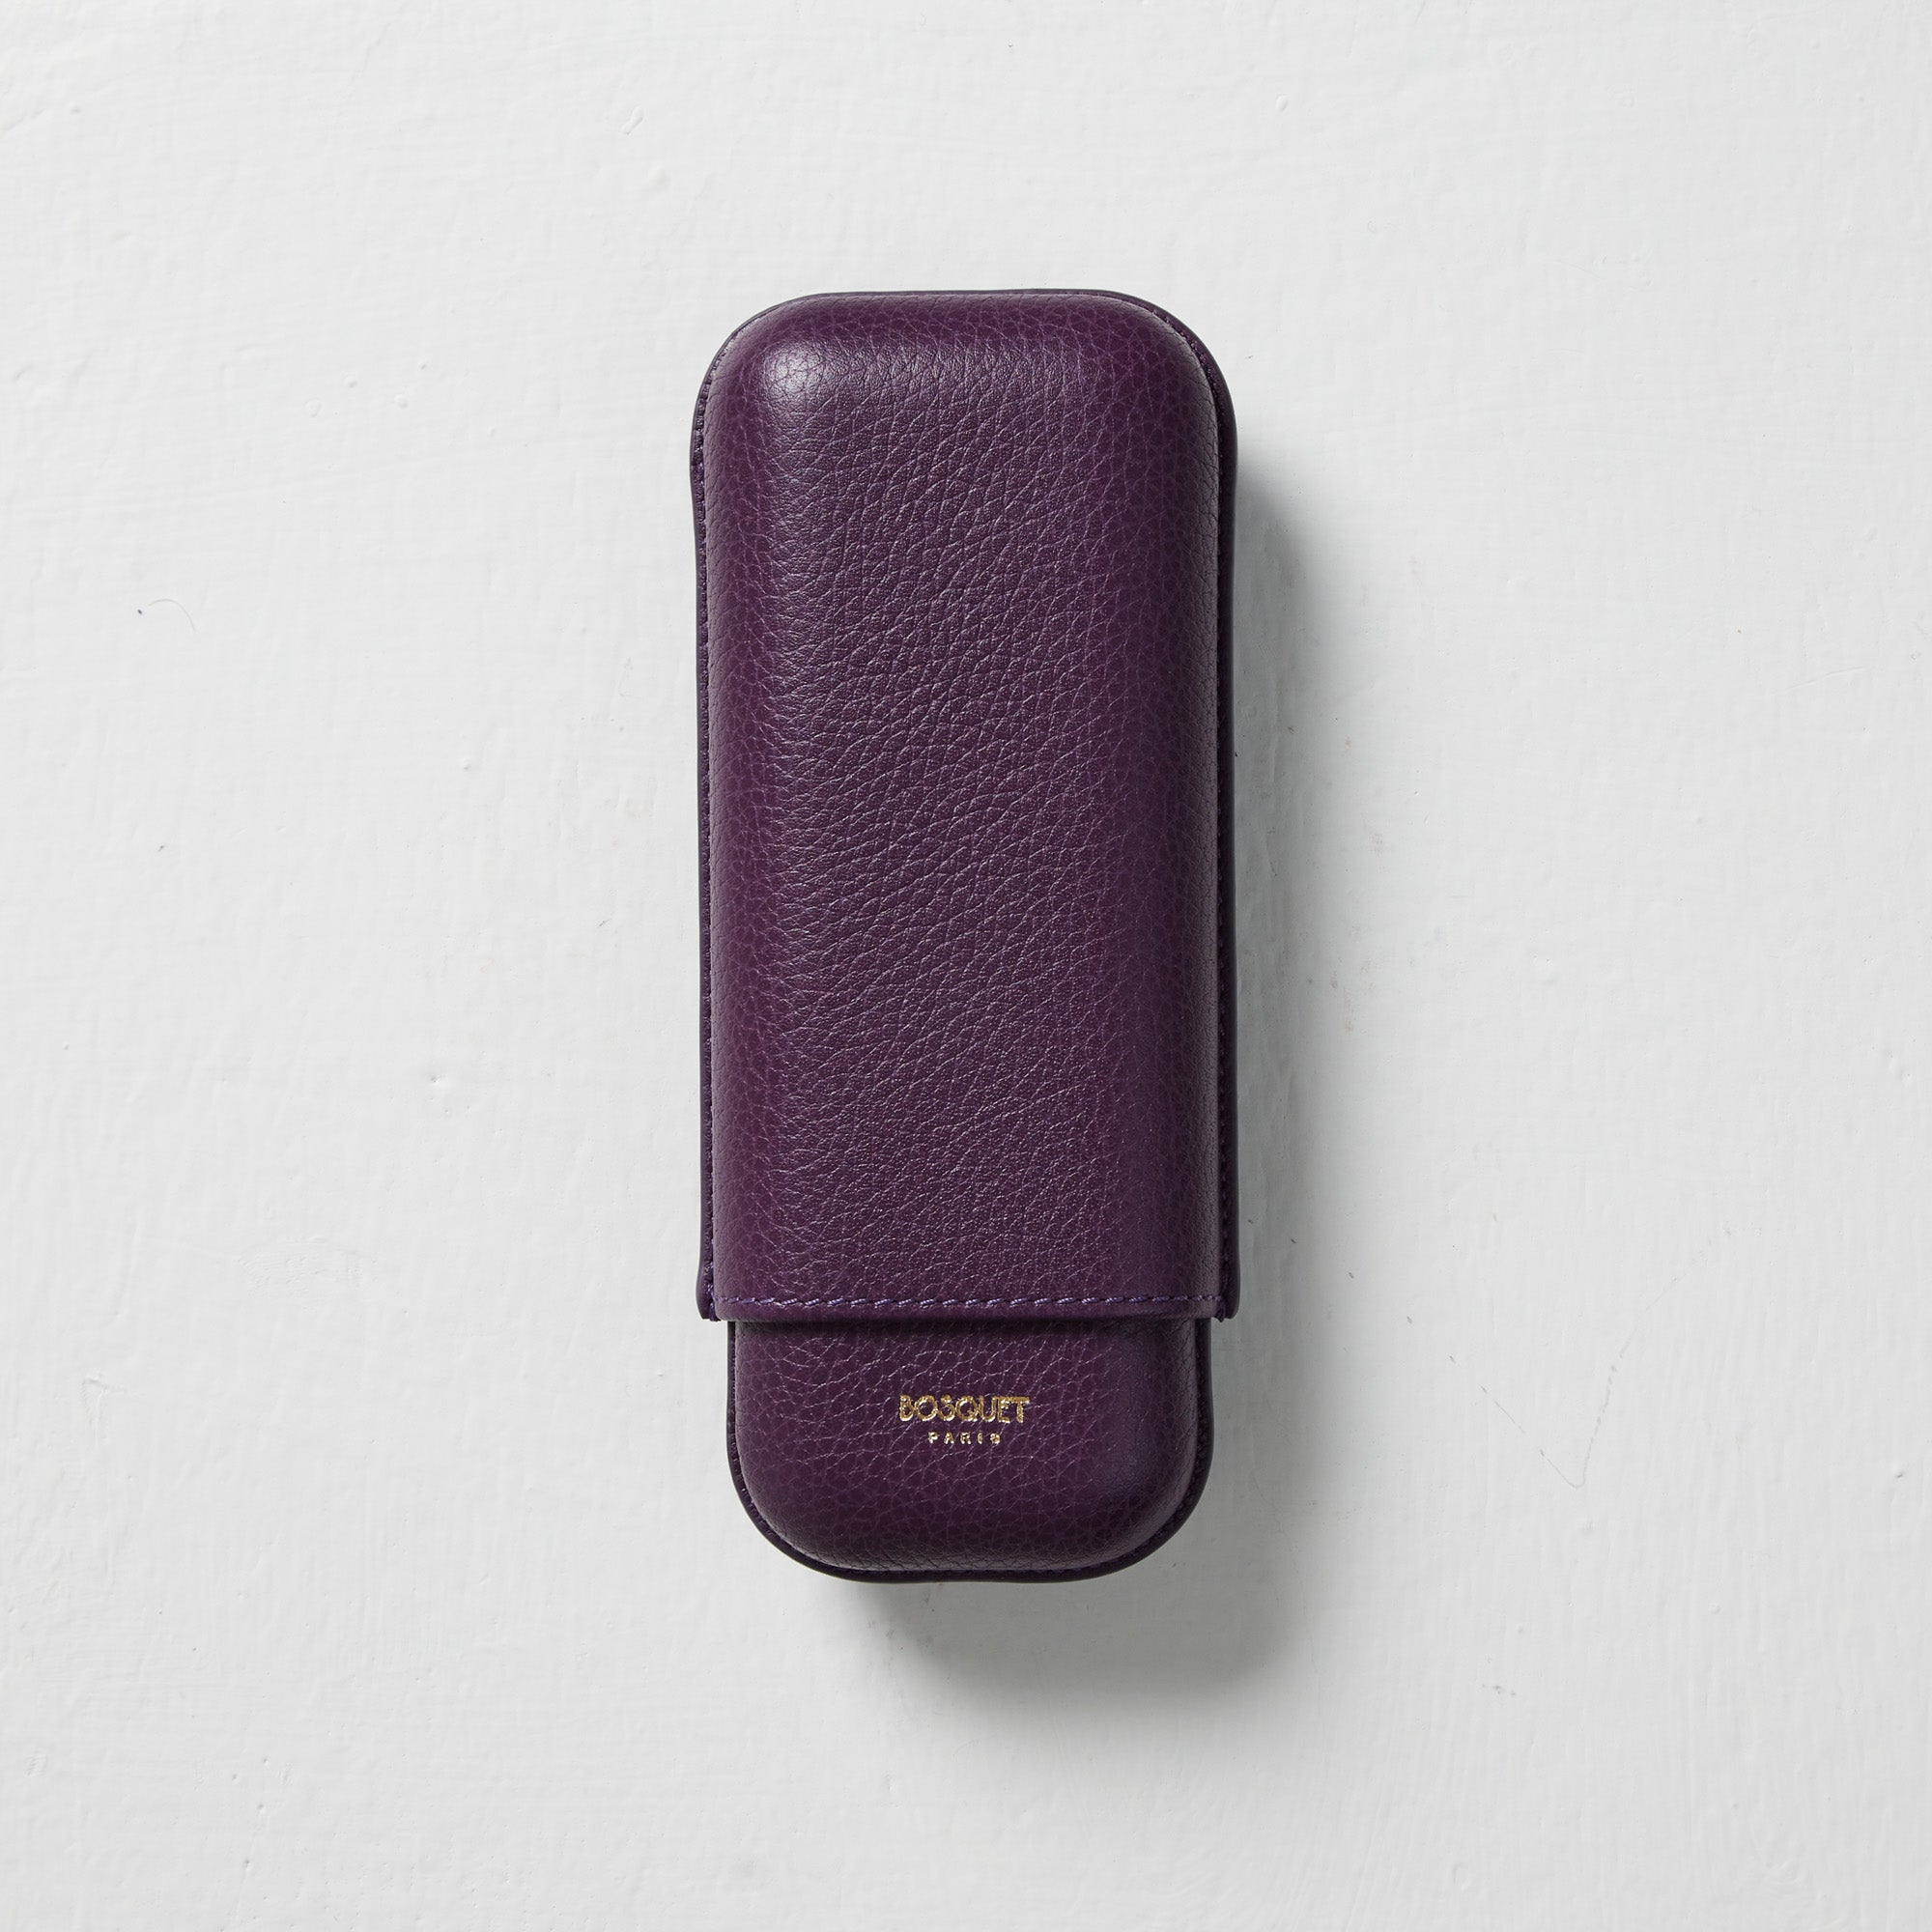 A Bosquet smooth purple leather cigar case in purple on a white surface.